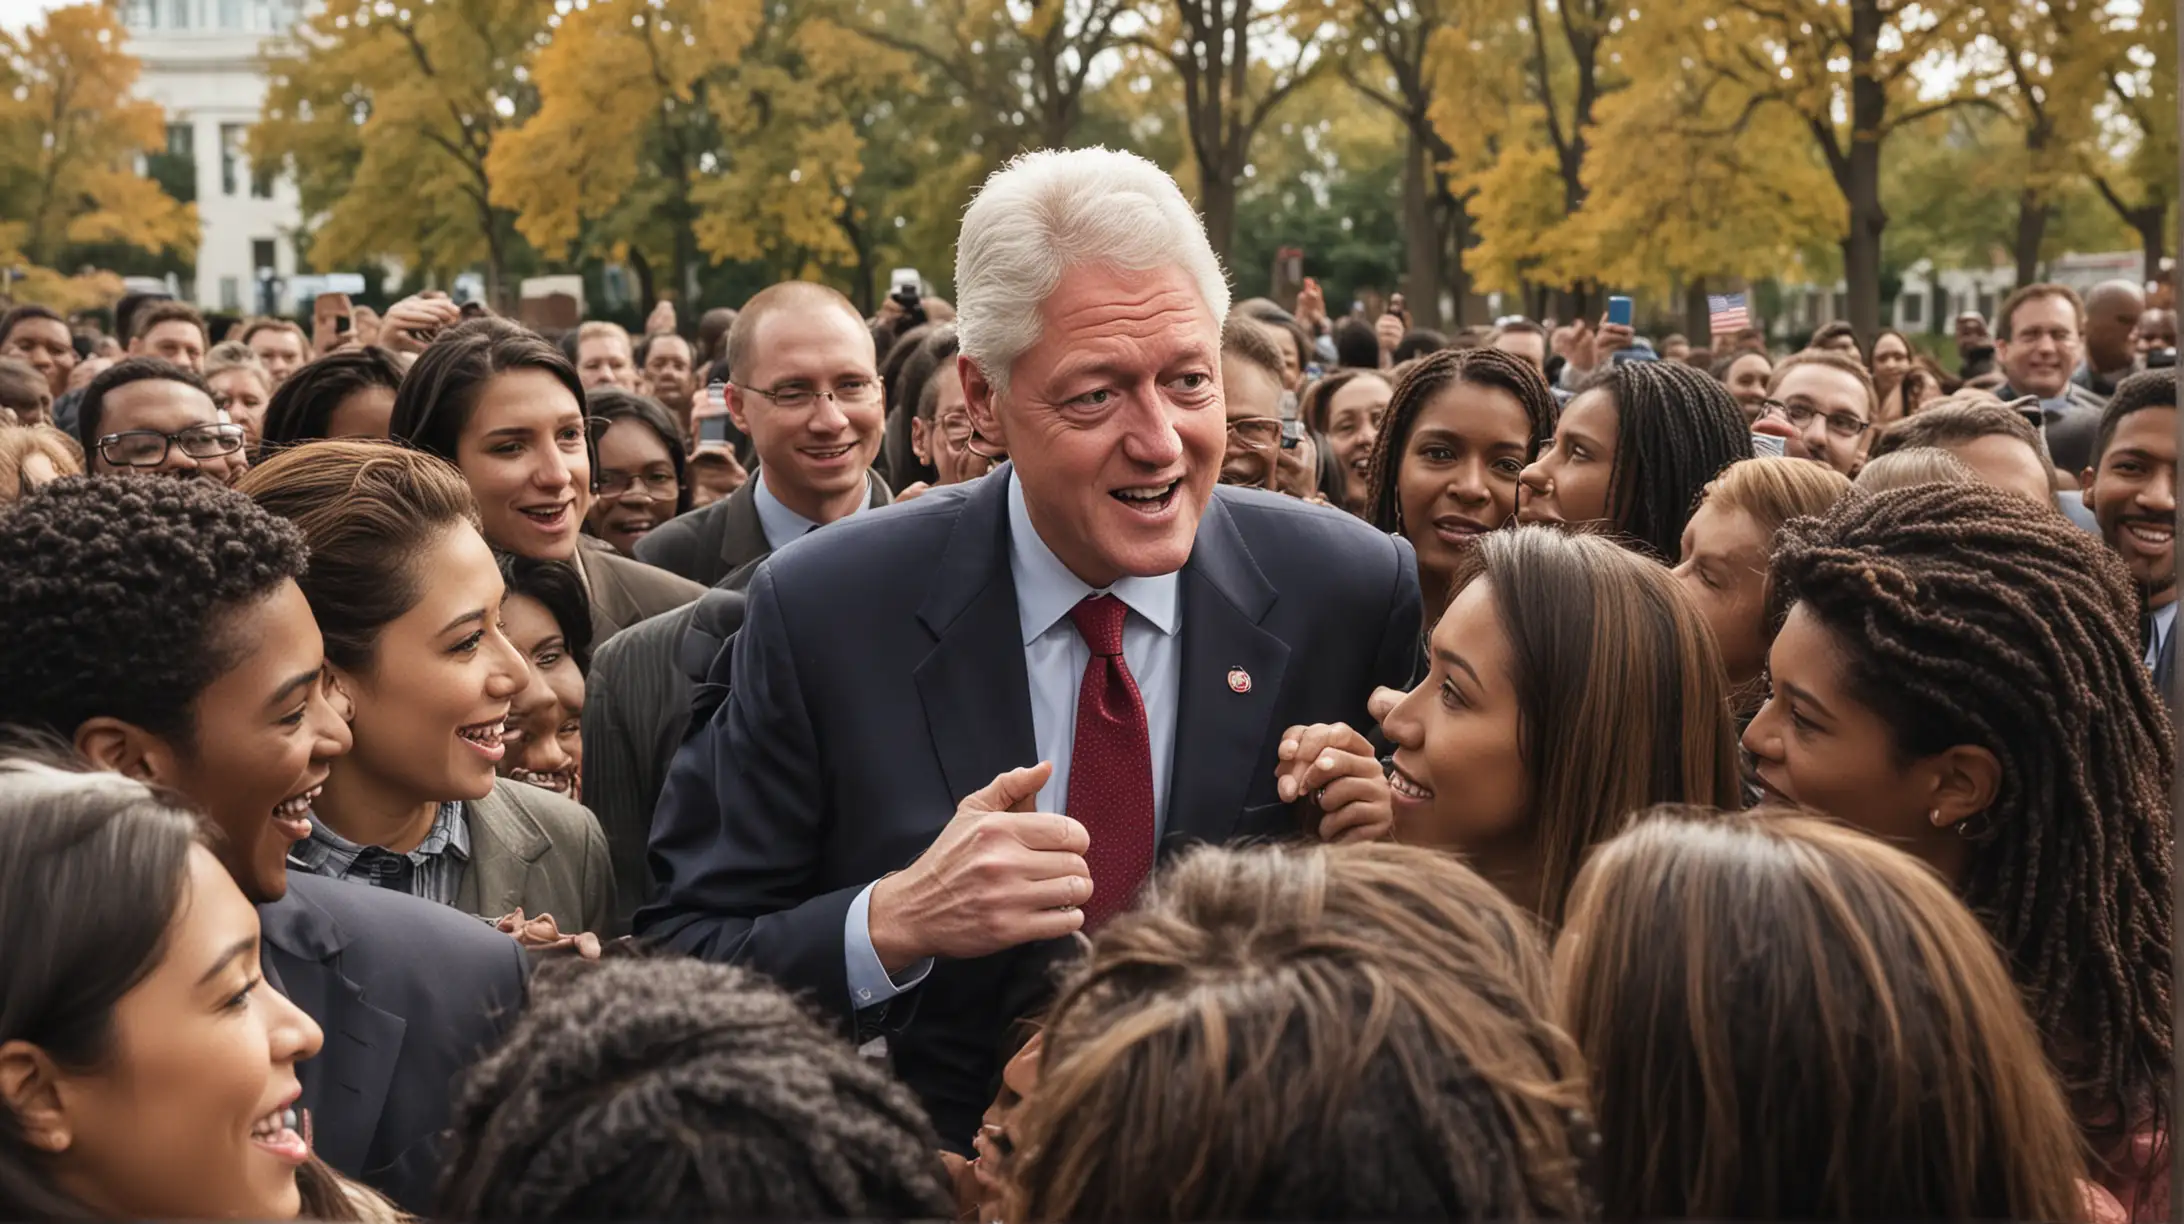 An image of Bill Clinton interacting with a diverse group of people,  engaging in conversation, with a warm and approachable demeanor, symbolizing his reputation as "The People's President" for his ability to connect with ordinary citizens.